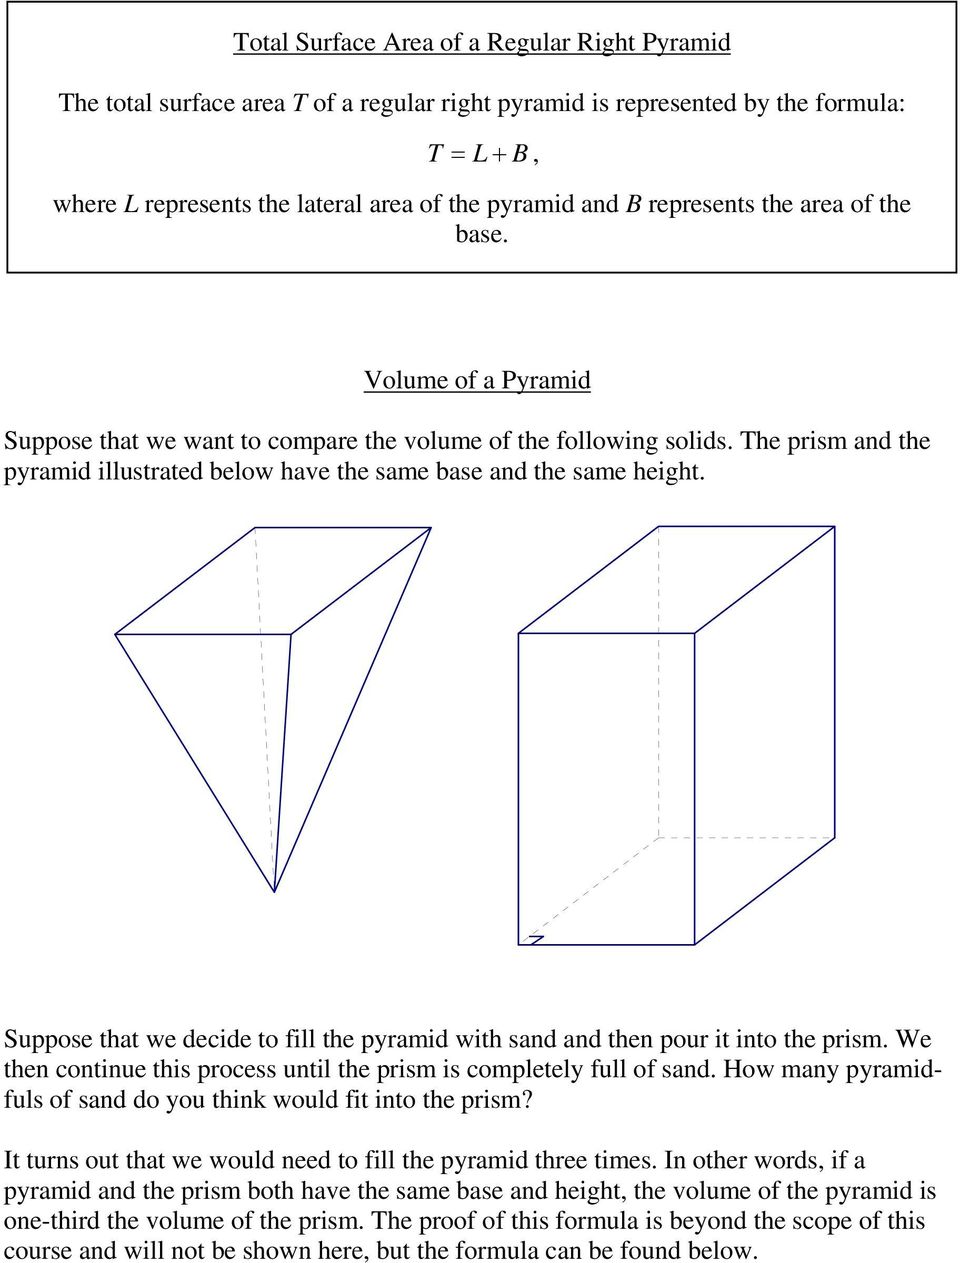 The prism and the pyramid illustrated below have the same base and the same height. Suppose that we decide to fill the pyramid with sand and then pour it into the prism.